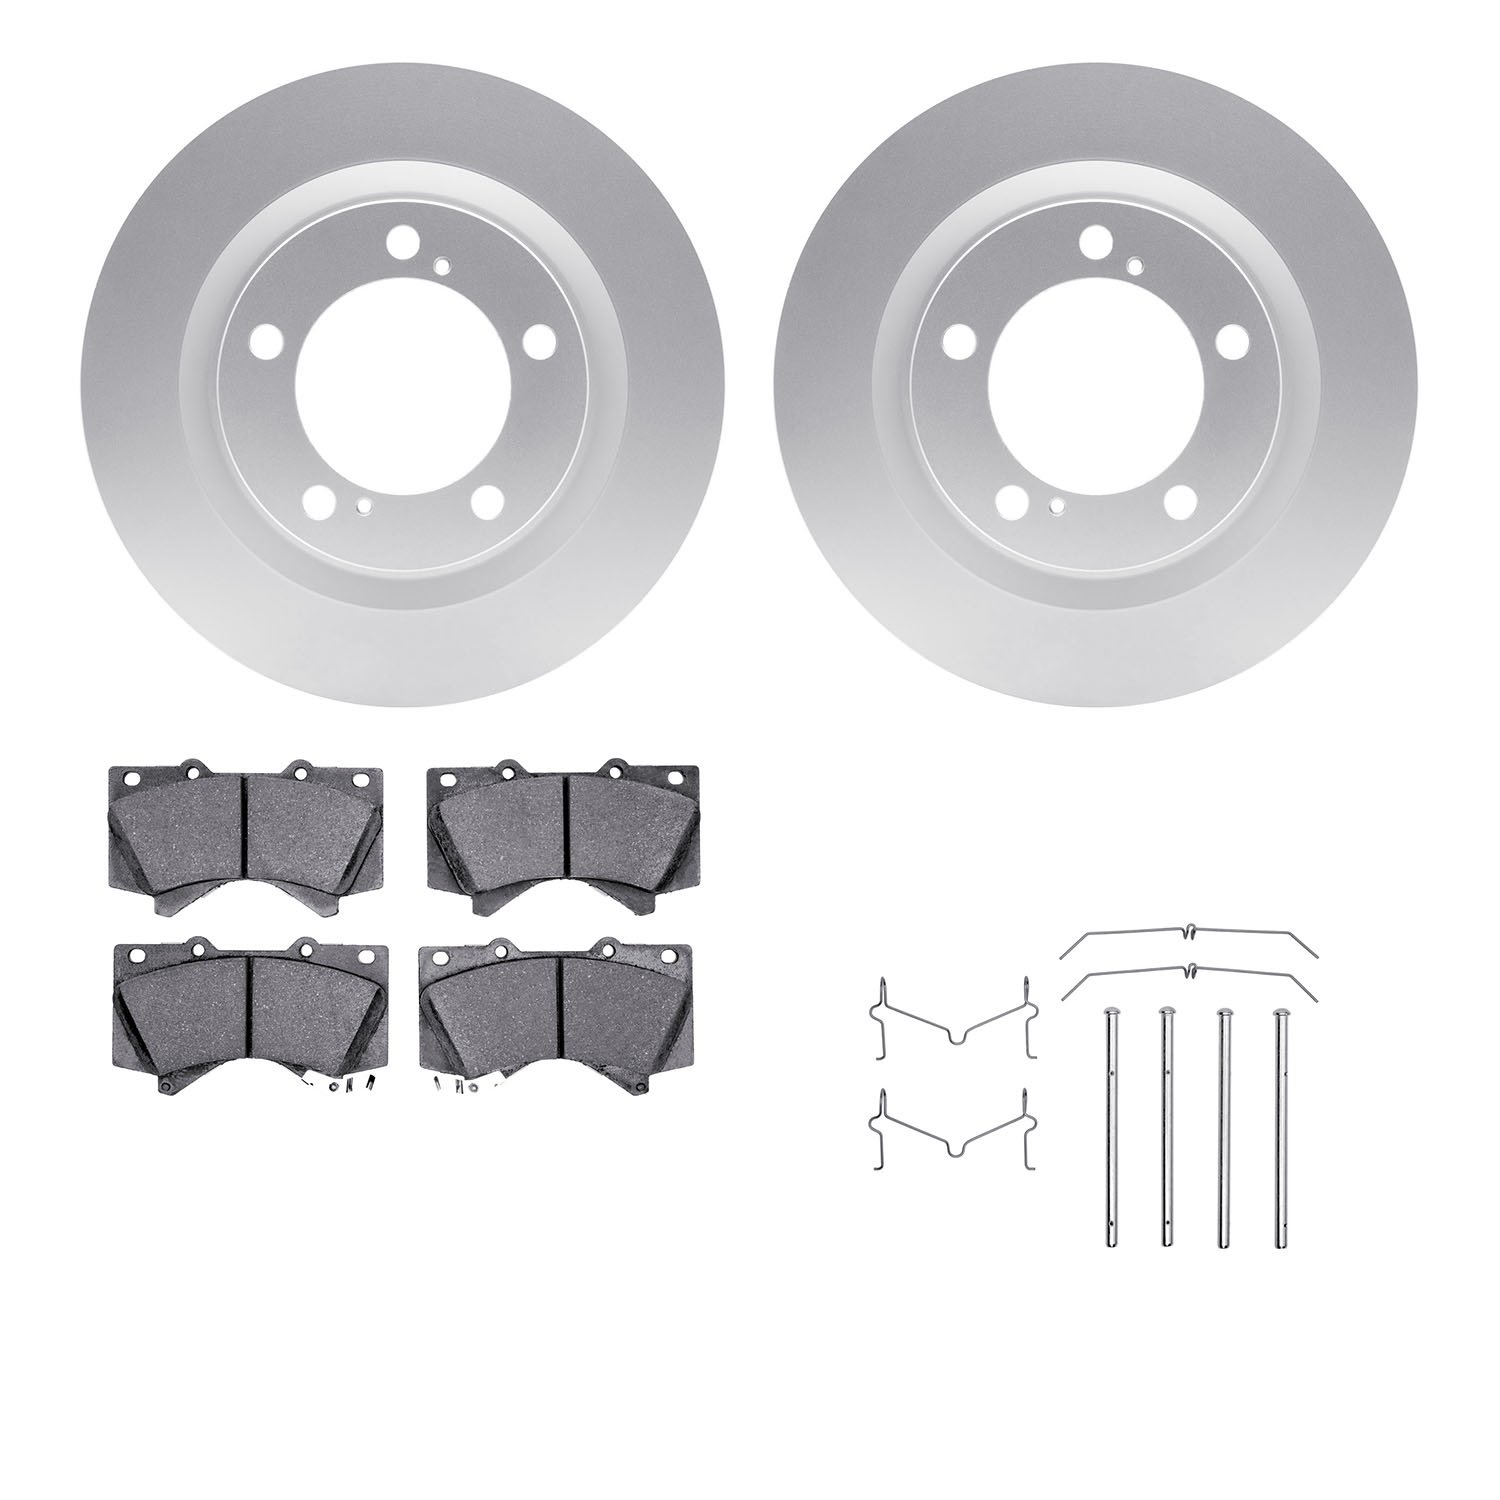 4412-76013 Geospec Brake Rotors with Ultimate-Duty Brake Pads & Hardware, Fits Select Lexus/Toyota/Scion, Position: Front